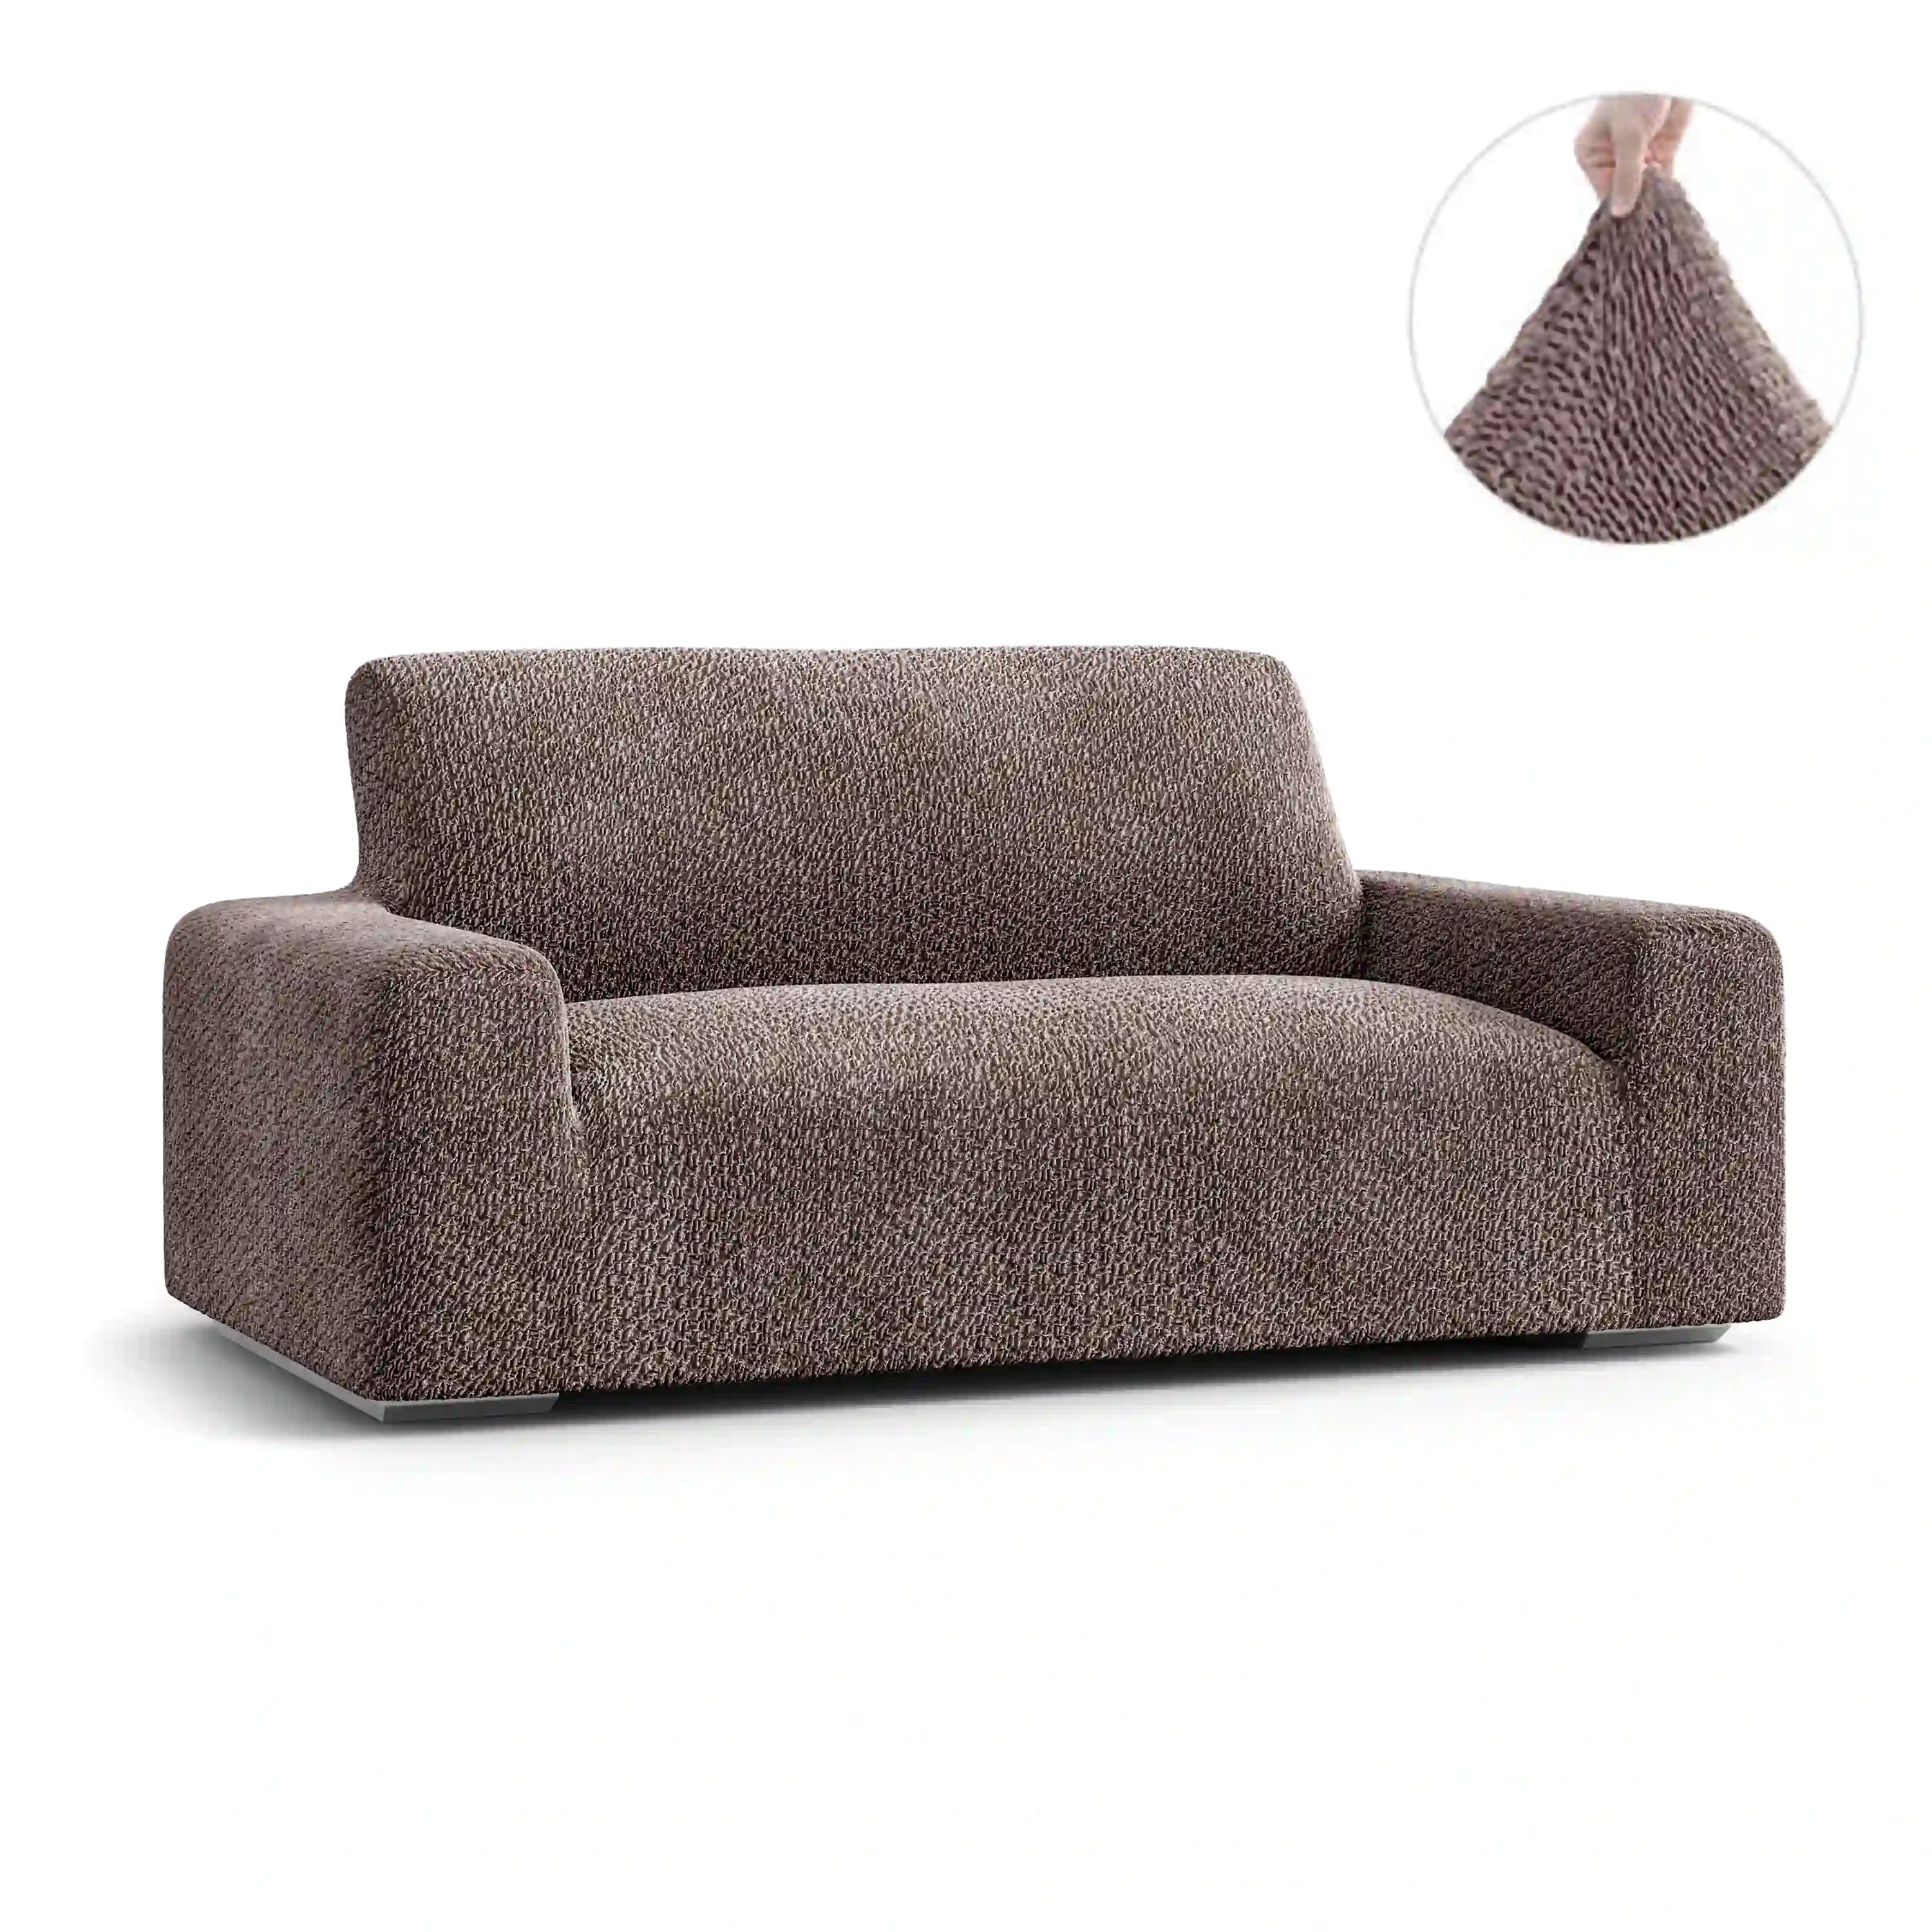 2 Seater Sofa Cover - Brown, Velvet Collection